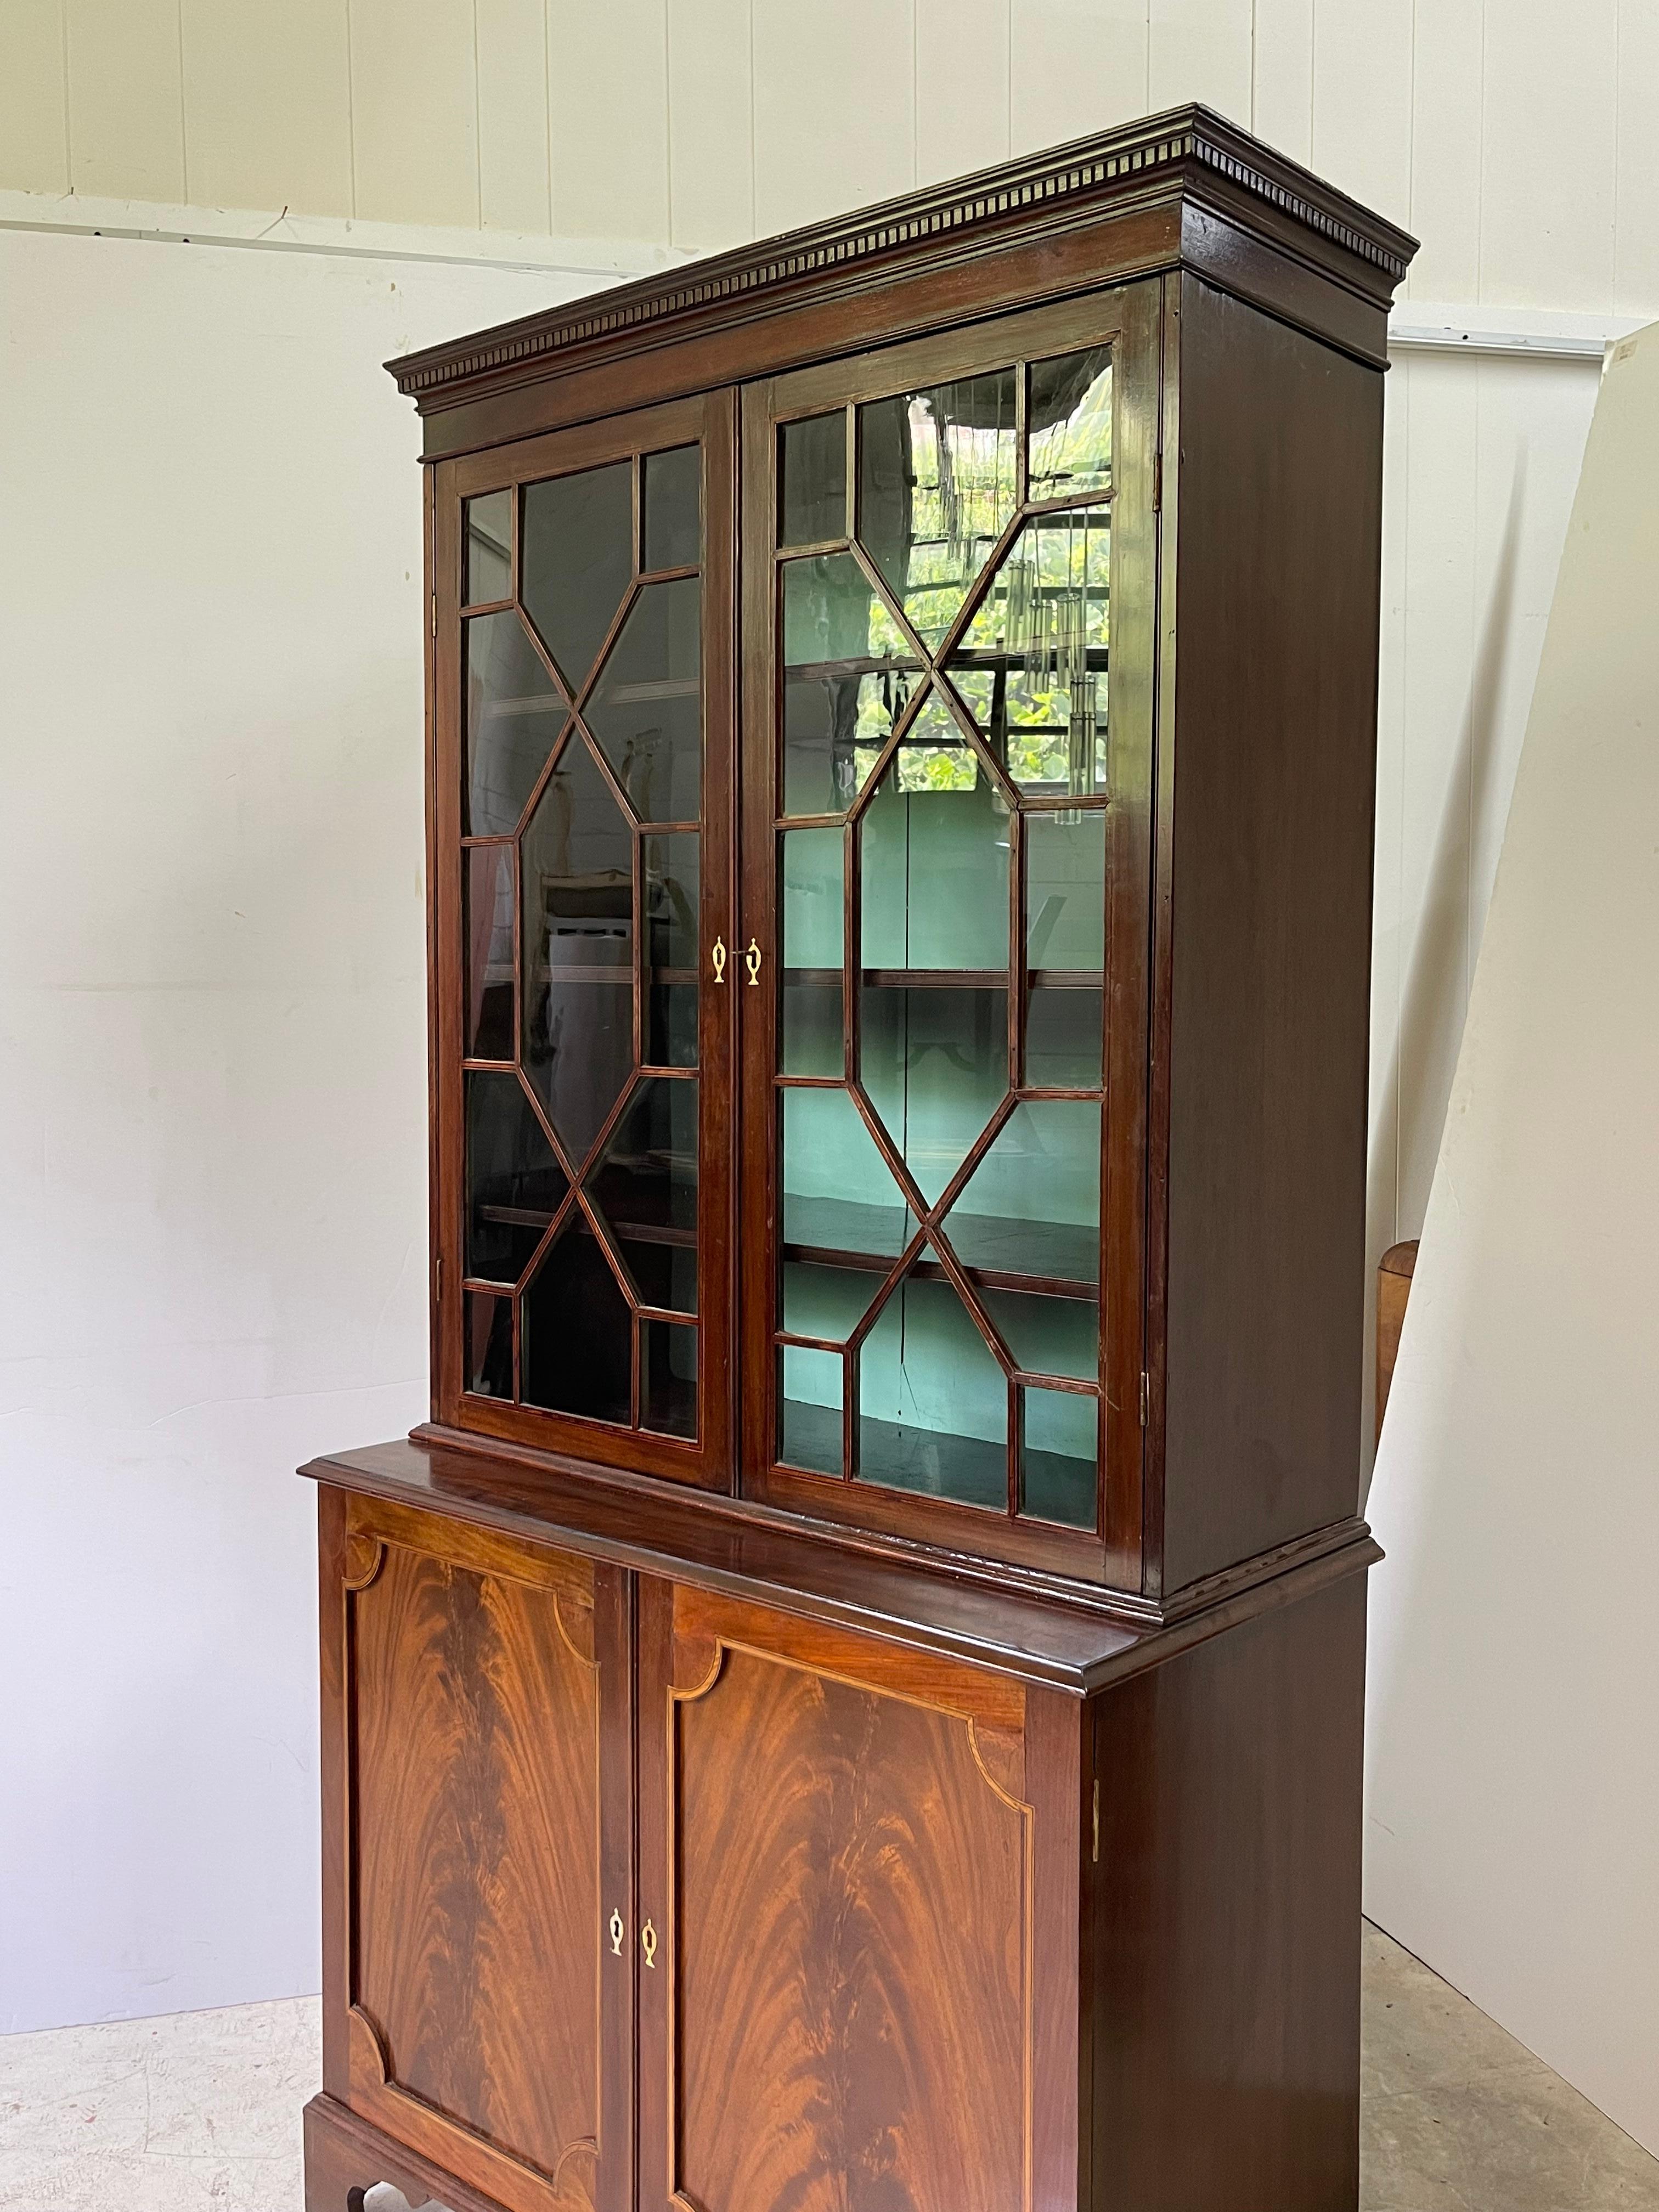 An English late George III period bookcase made of flame mahogany with fine satinwood inlay. The upper section has an elegant cornice with dentil moldings over a pair of glazed doors with an astragal bar. The interior is fitted with three solid